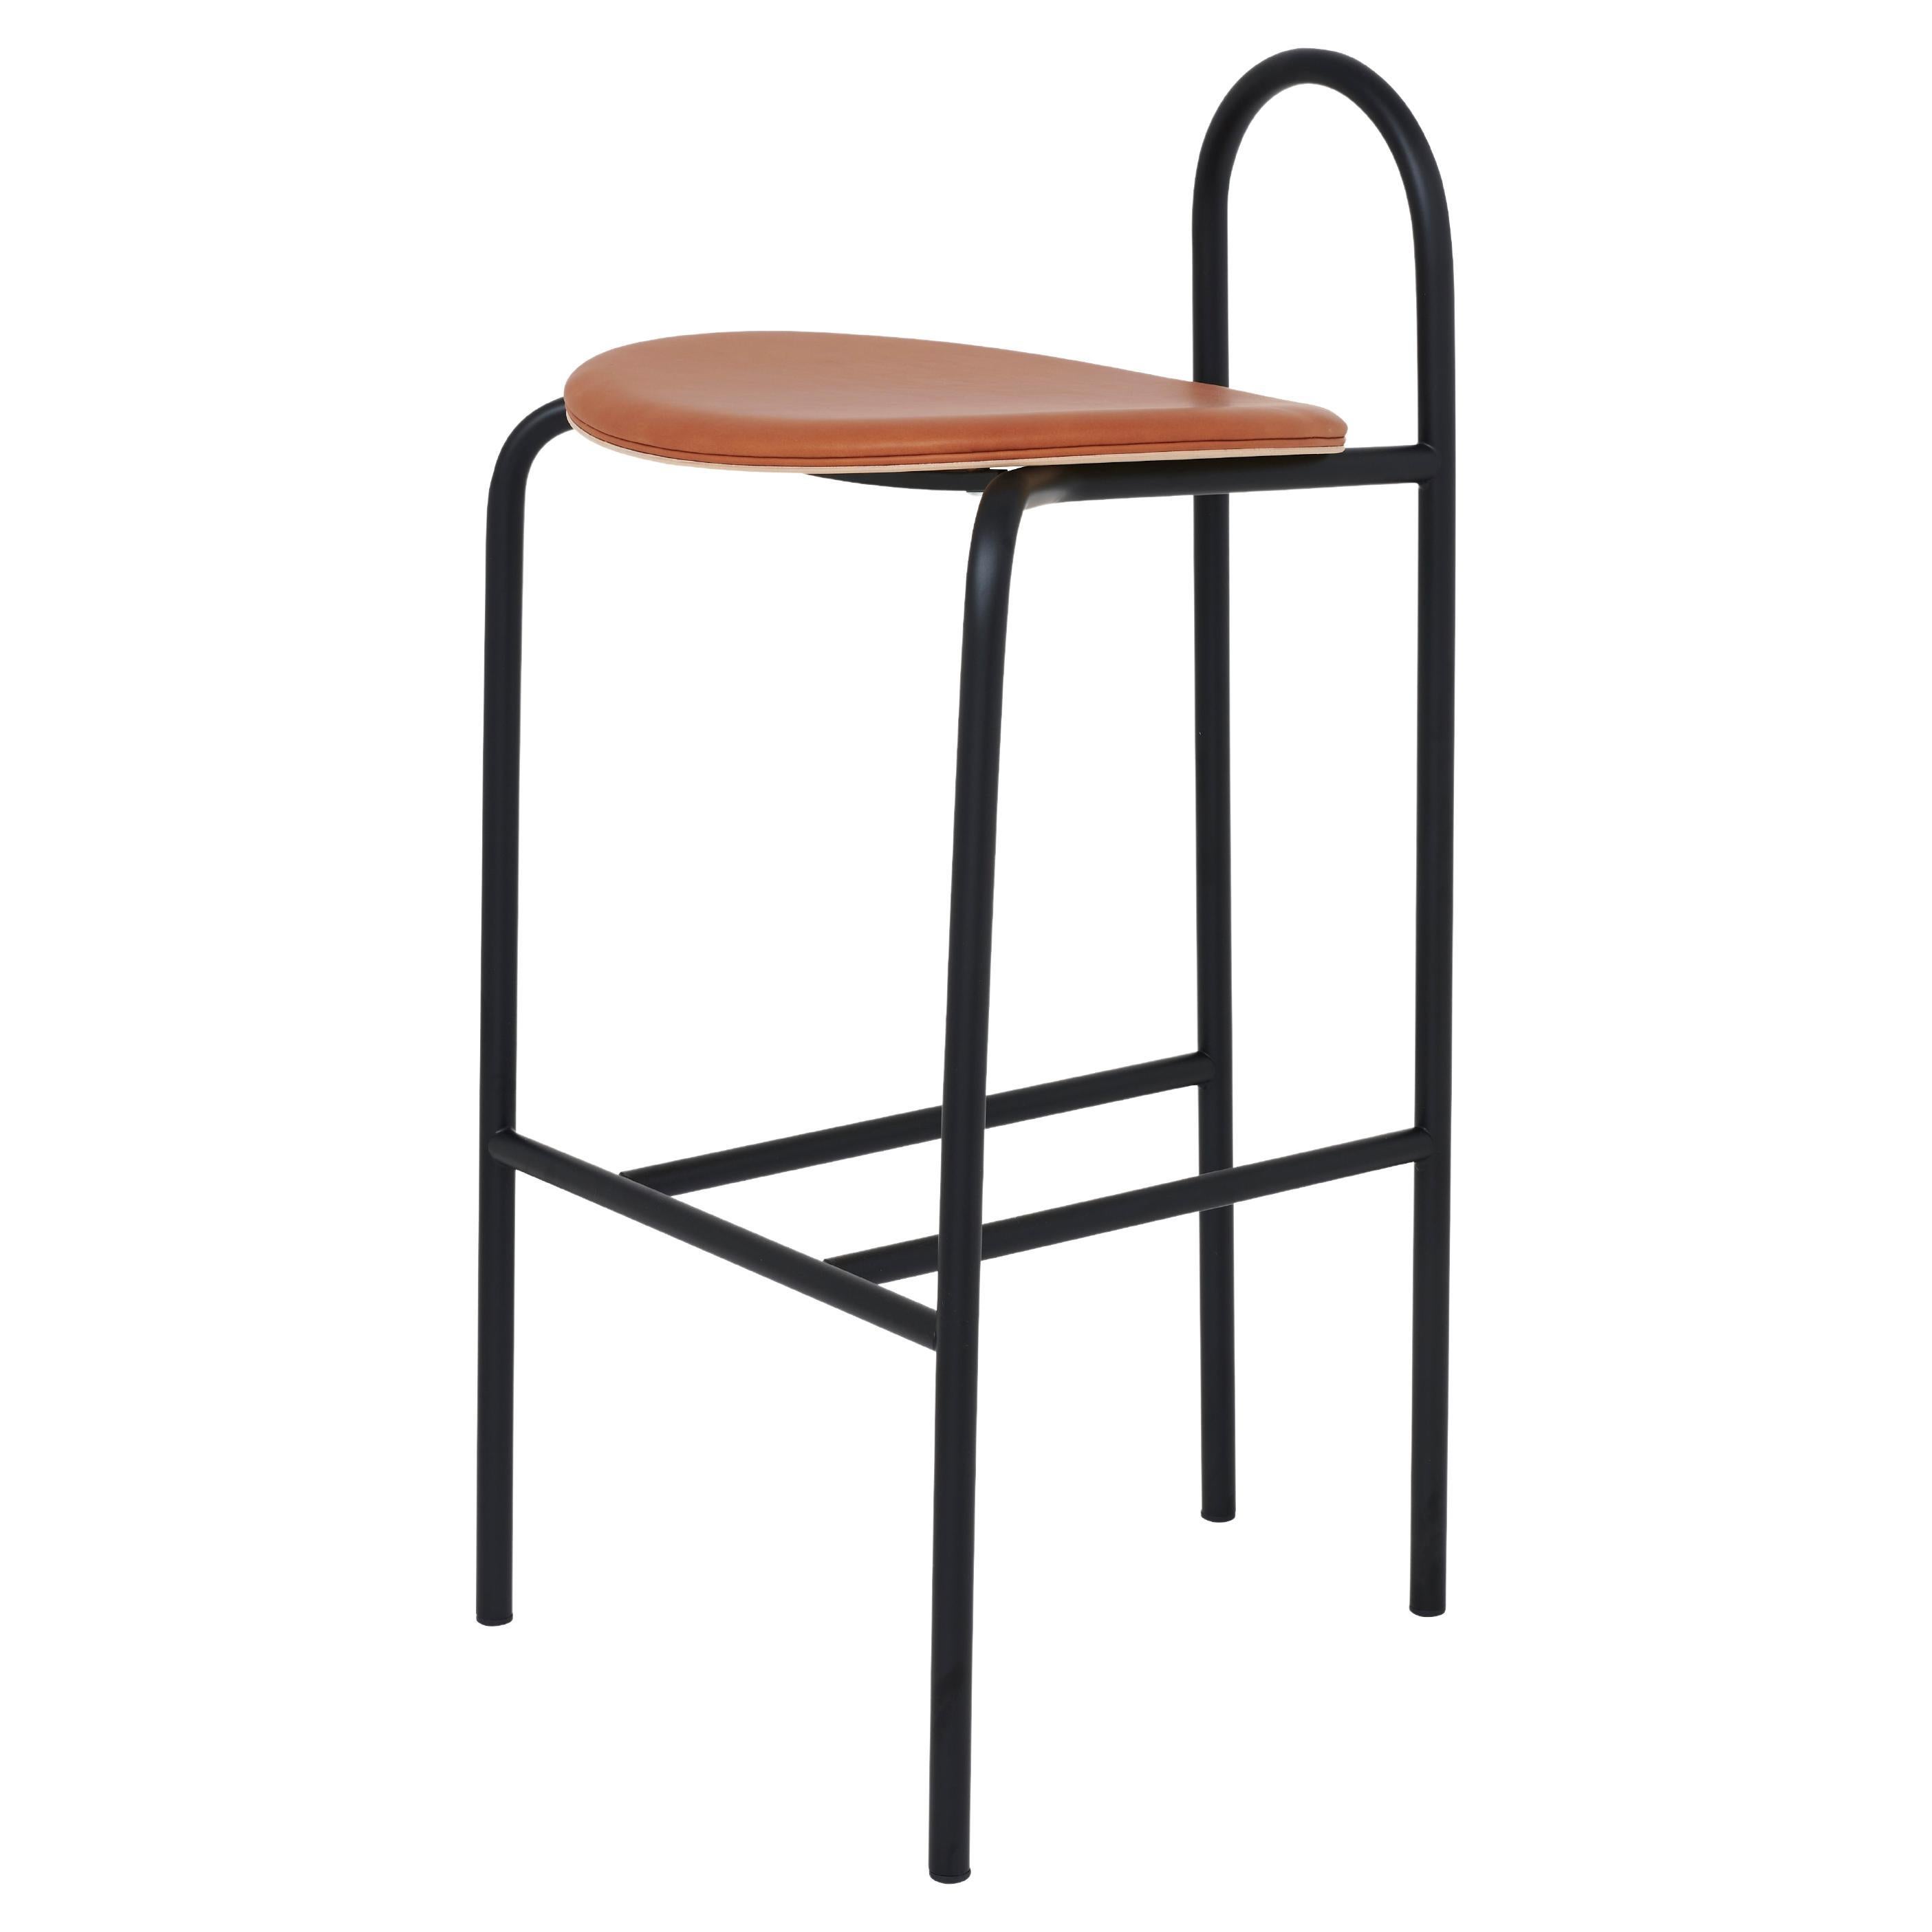 SP01 Michelle High Bar Stool in Edinburgh Cognac Leather, Made in Italy For Sale